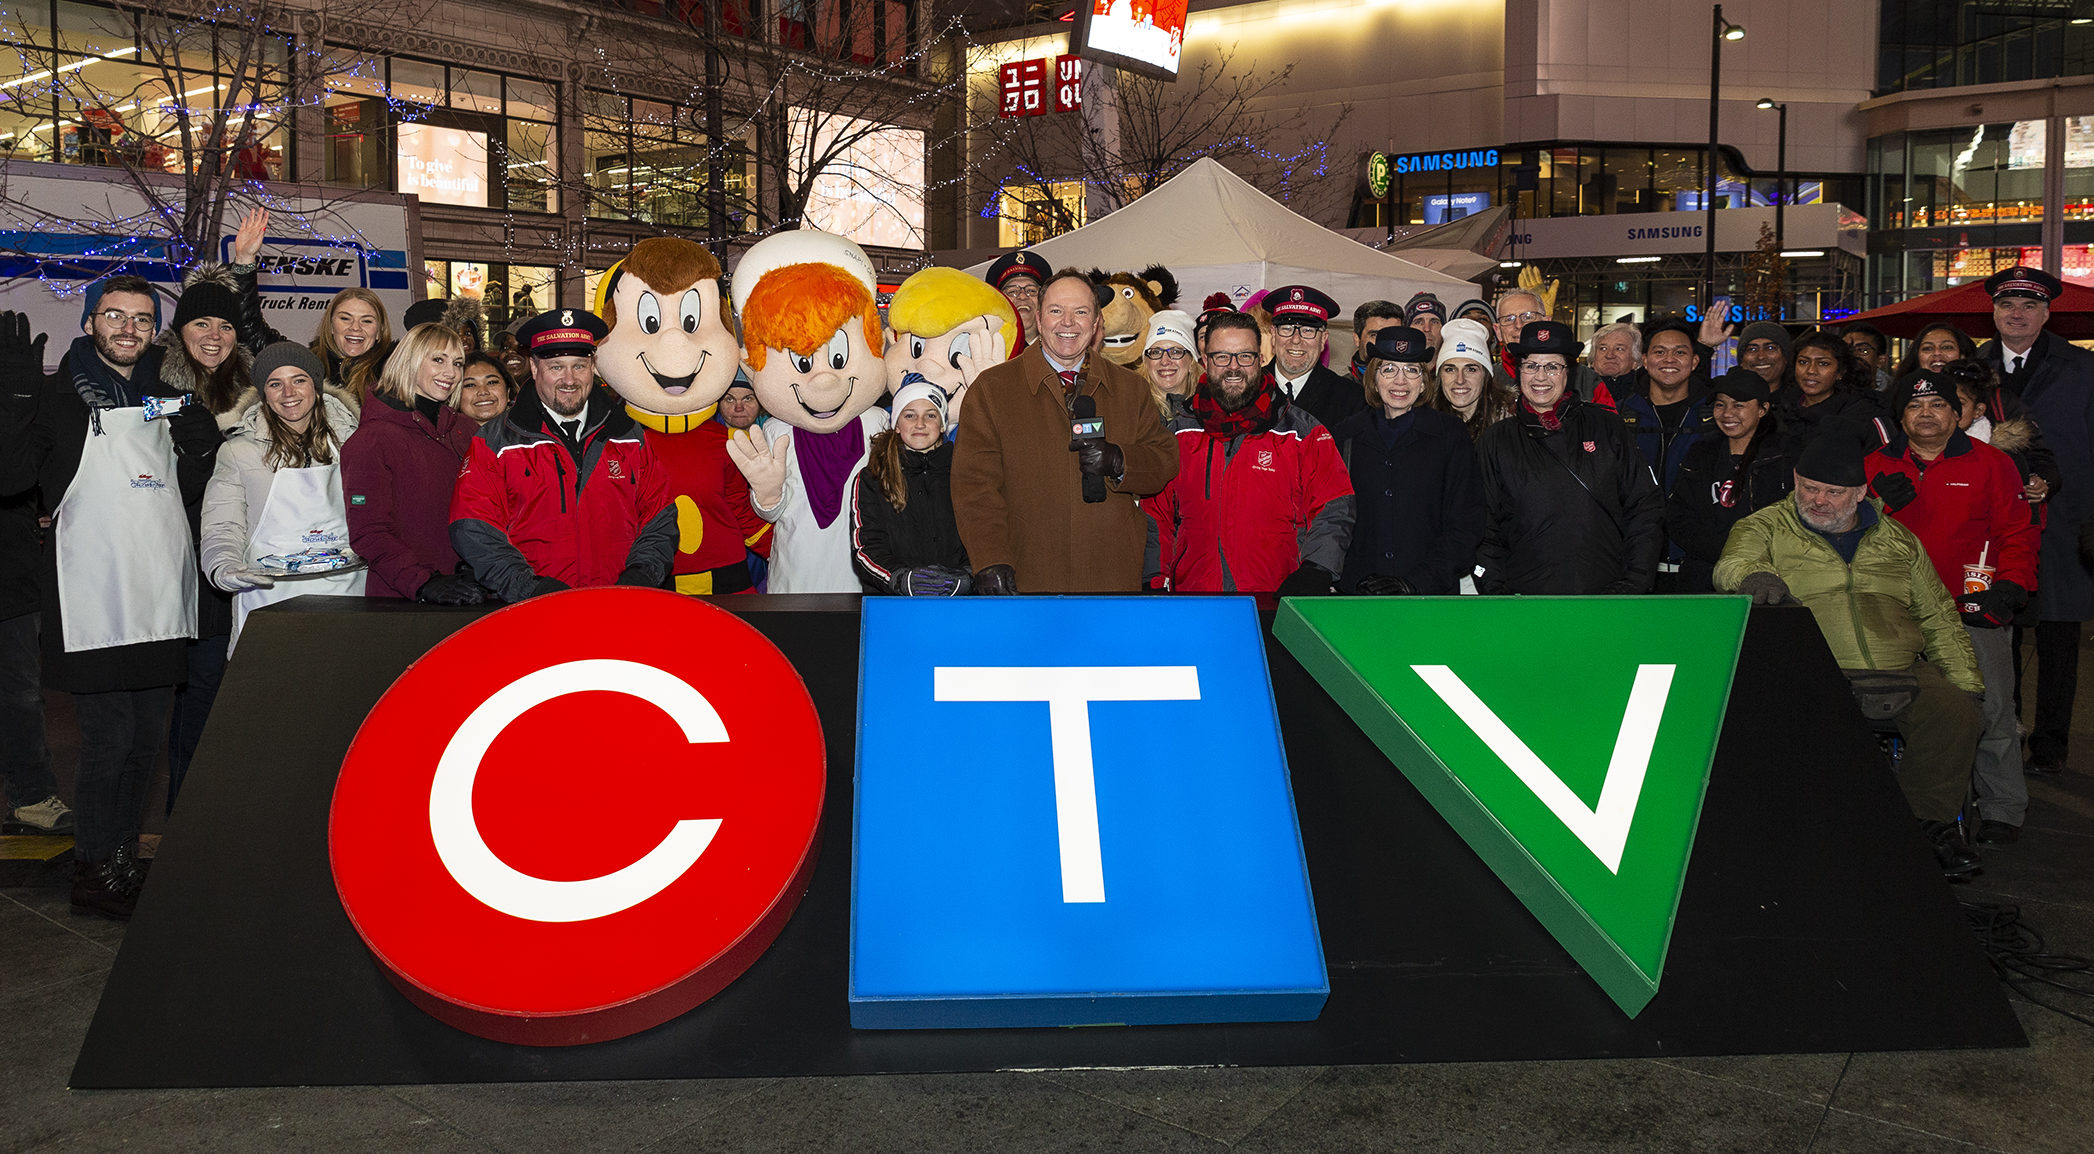 Toy Mountain team and supporters gather at the CTV sign